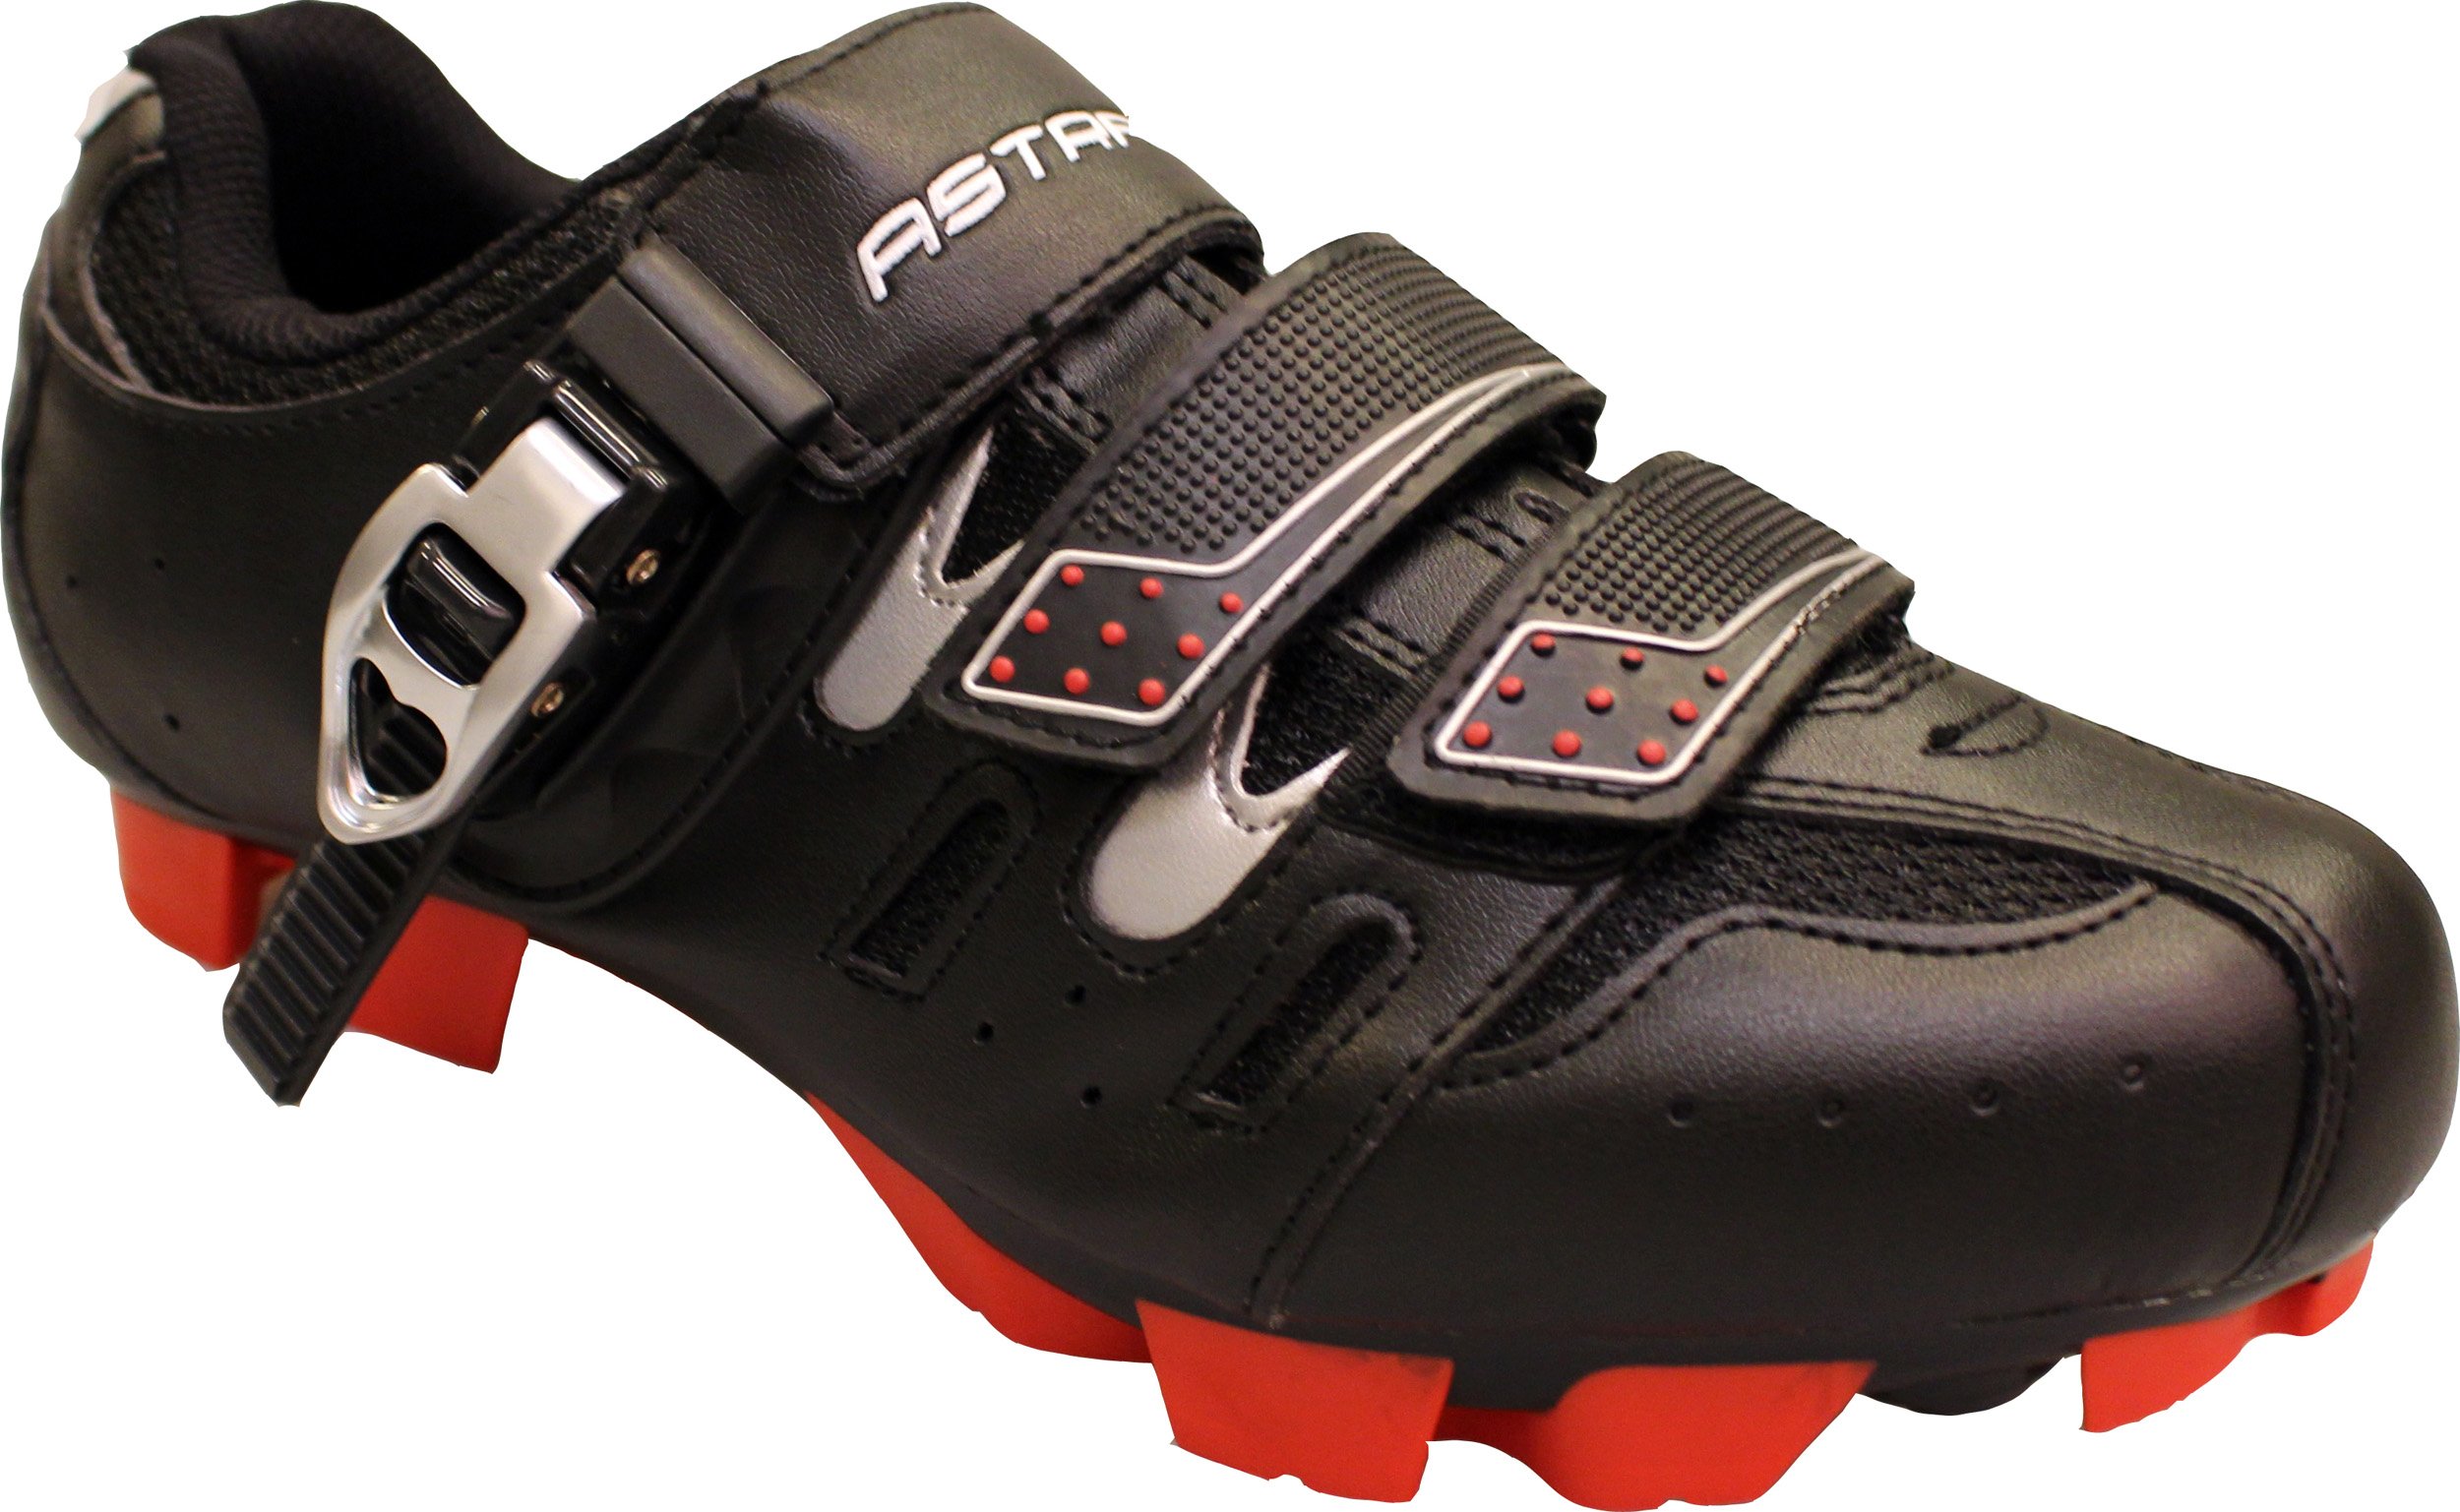 Astral MTB 550 Cycling Shoes with Click Buckle